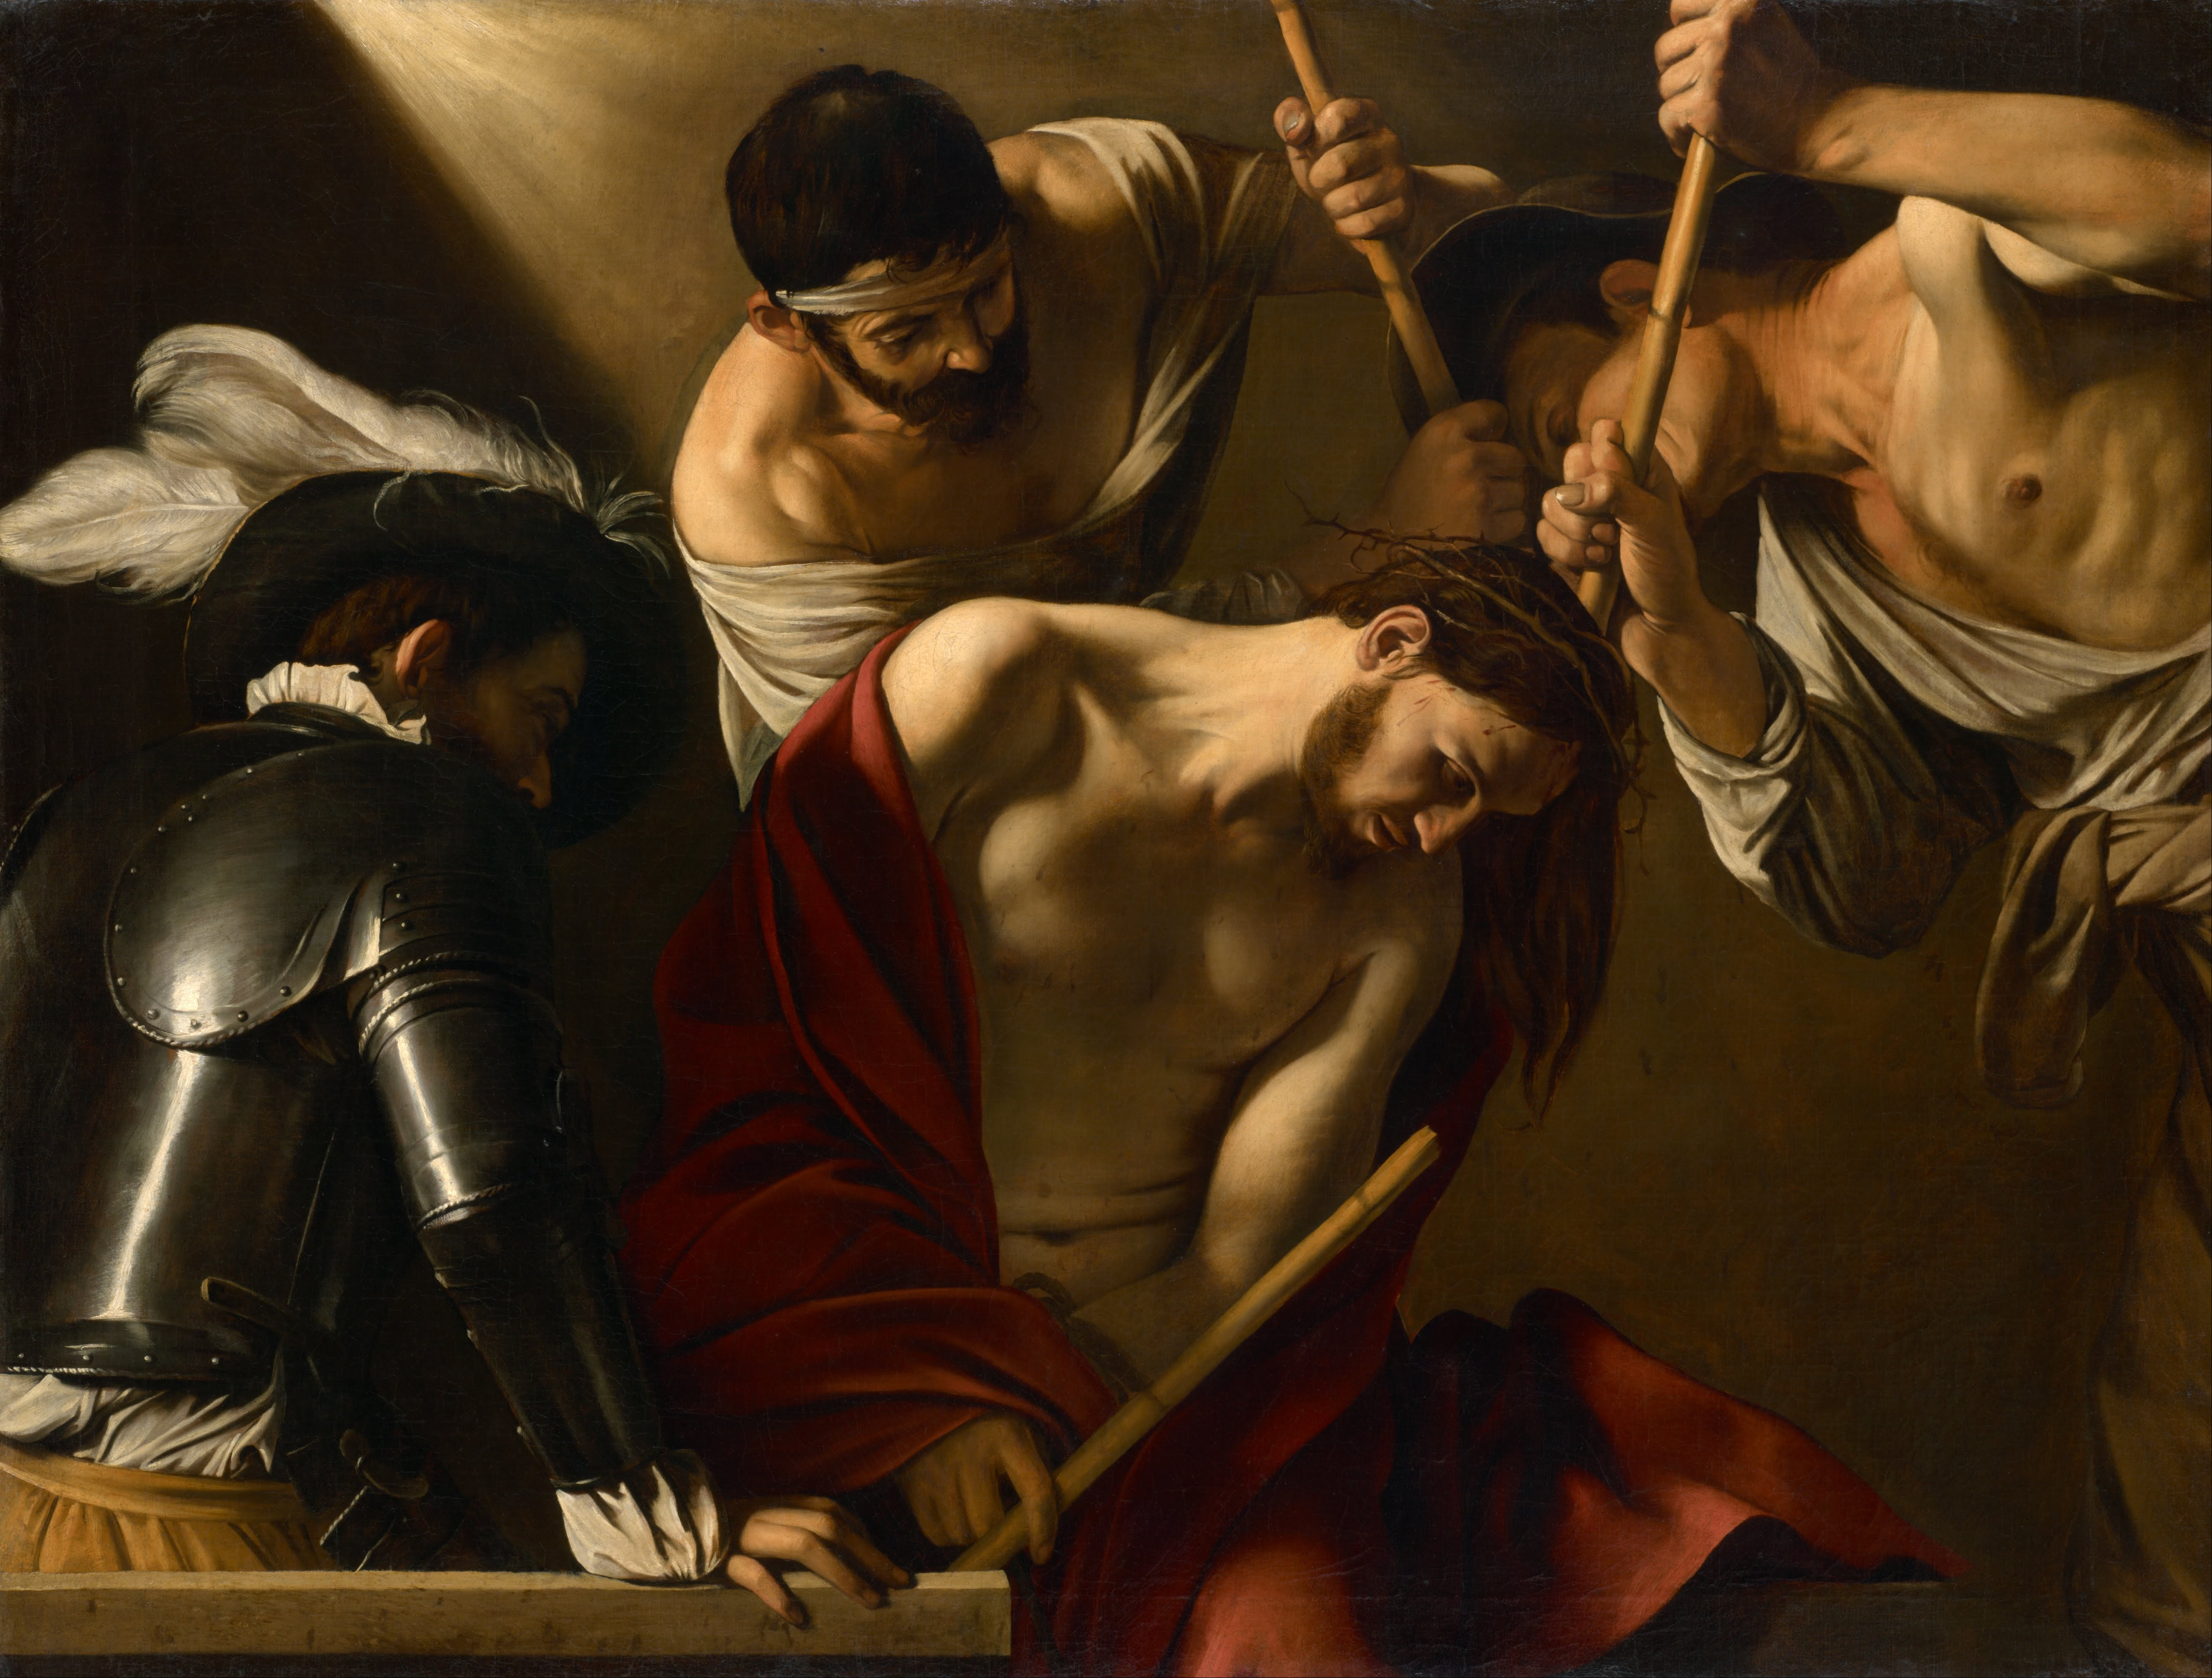 michelangelo_merisi_called_caravaggio_-_the_crowning_with_thorns_-_google_art_project